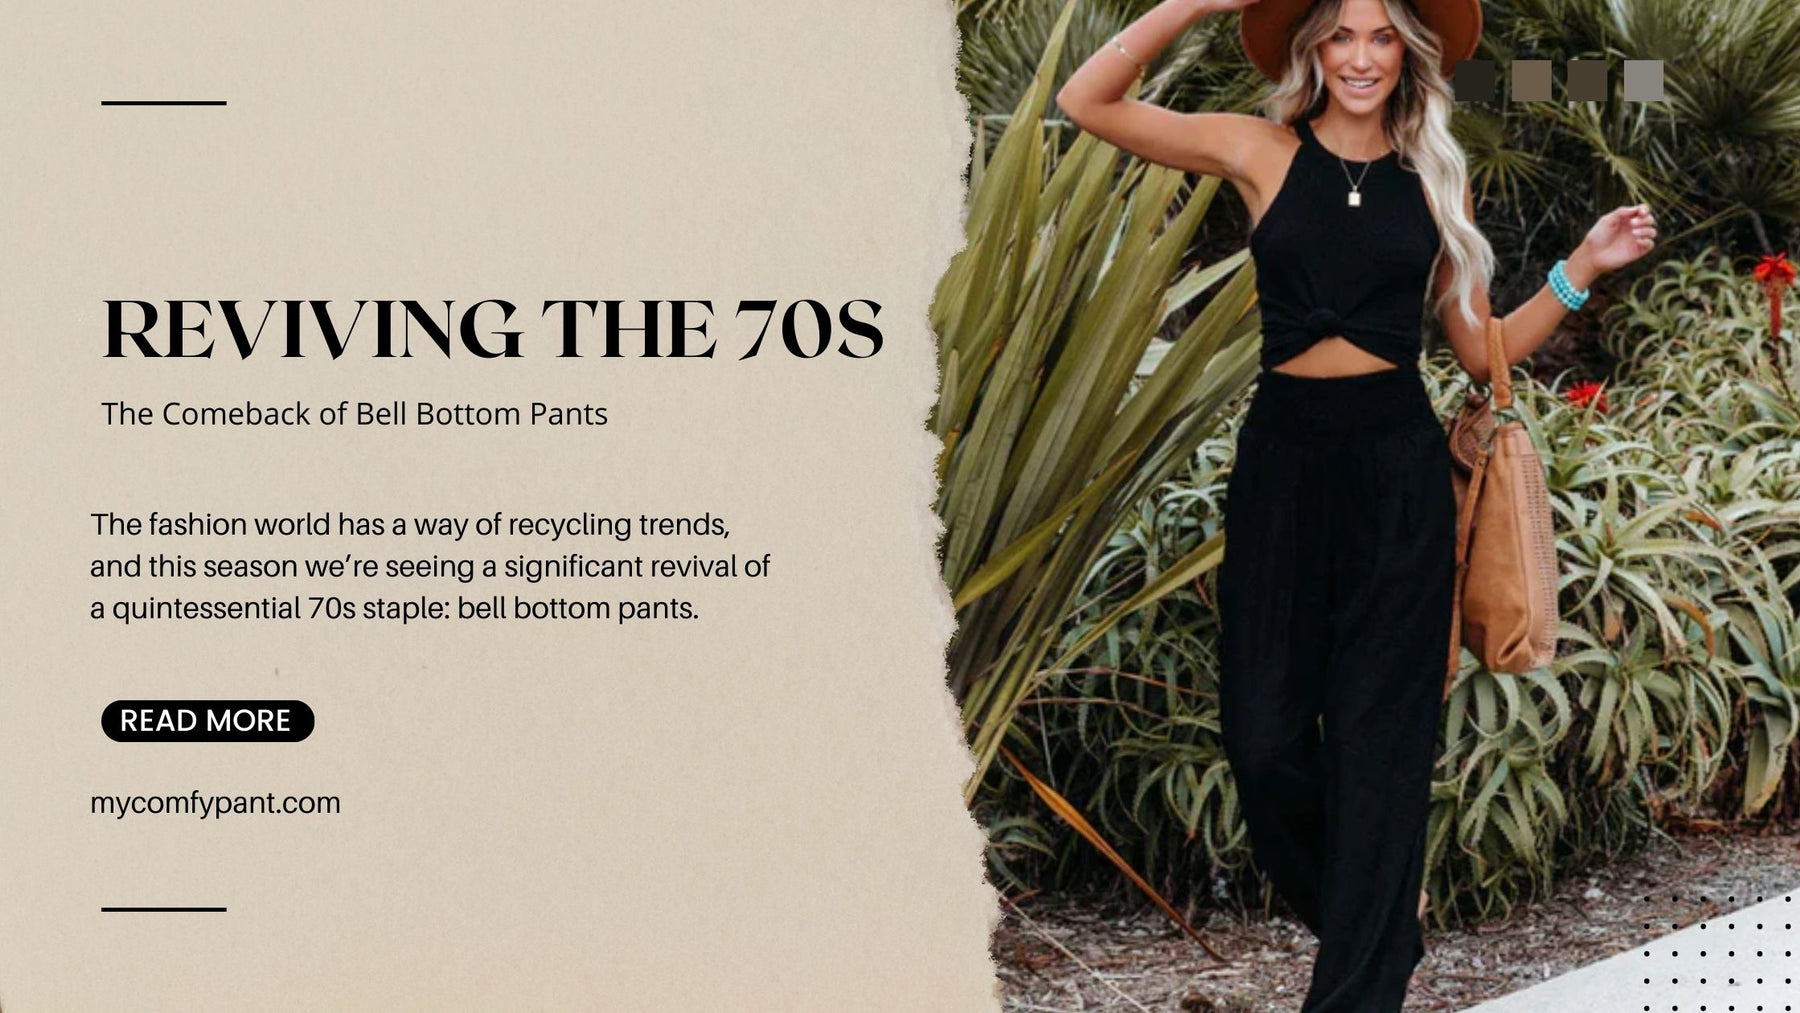 Reviving the 70s: The Comeback of Bell Bottom Pants